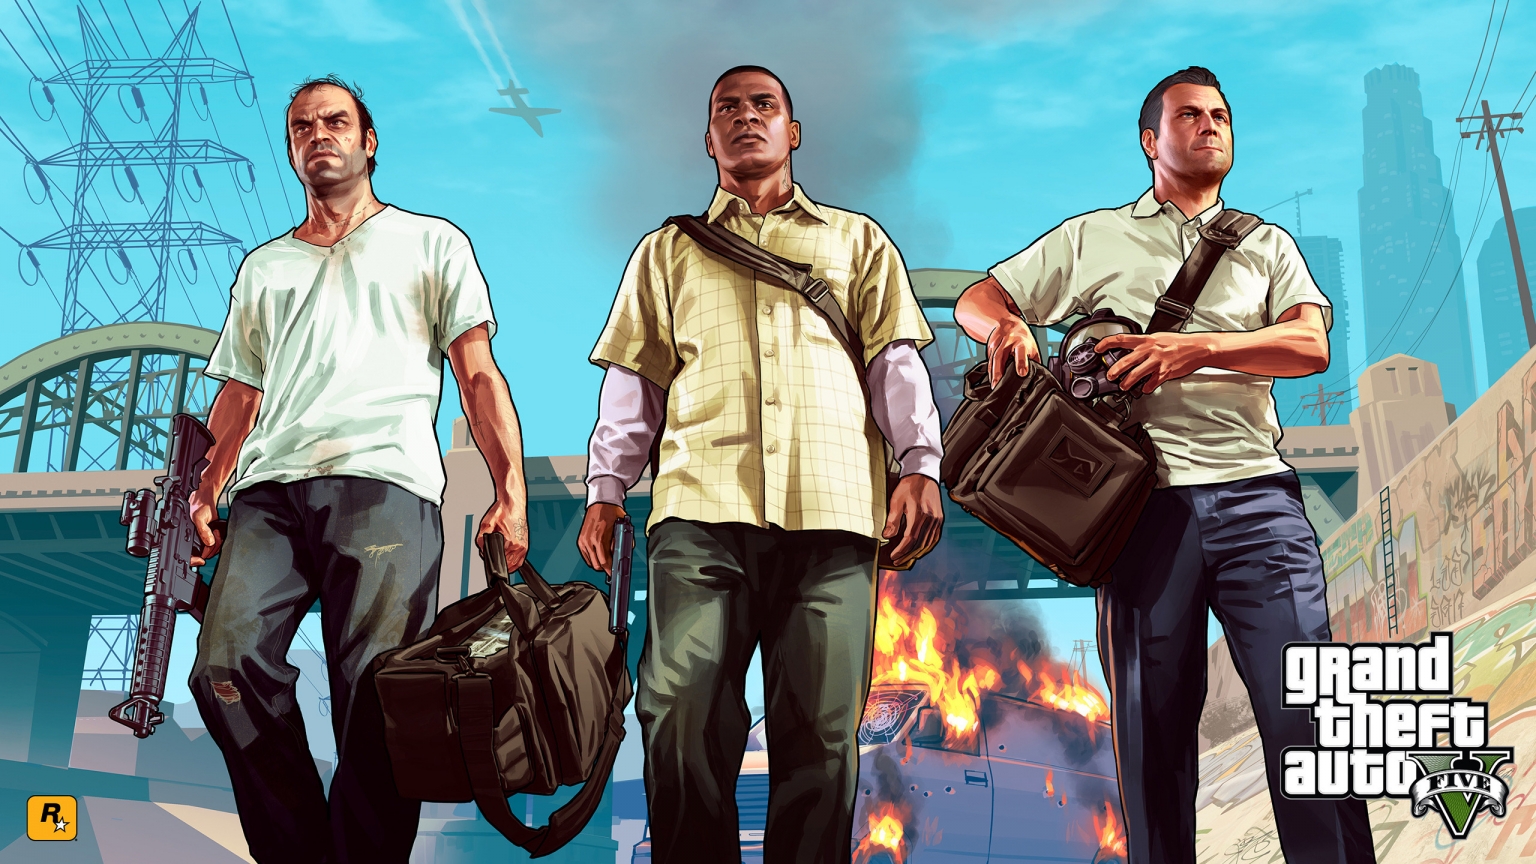 Gta 5 Main Characters for 1536 x 864 HDTV resolution